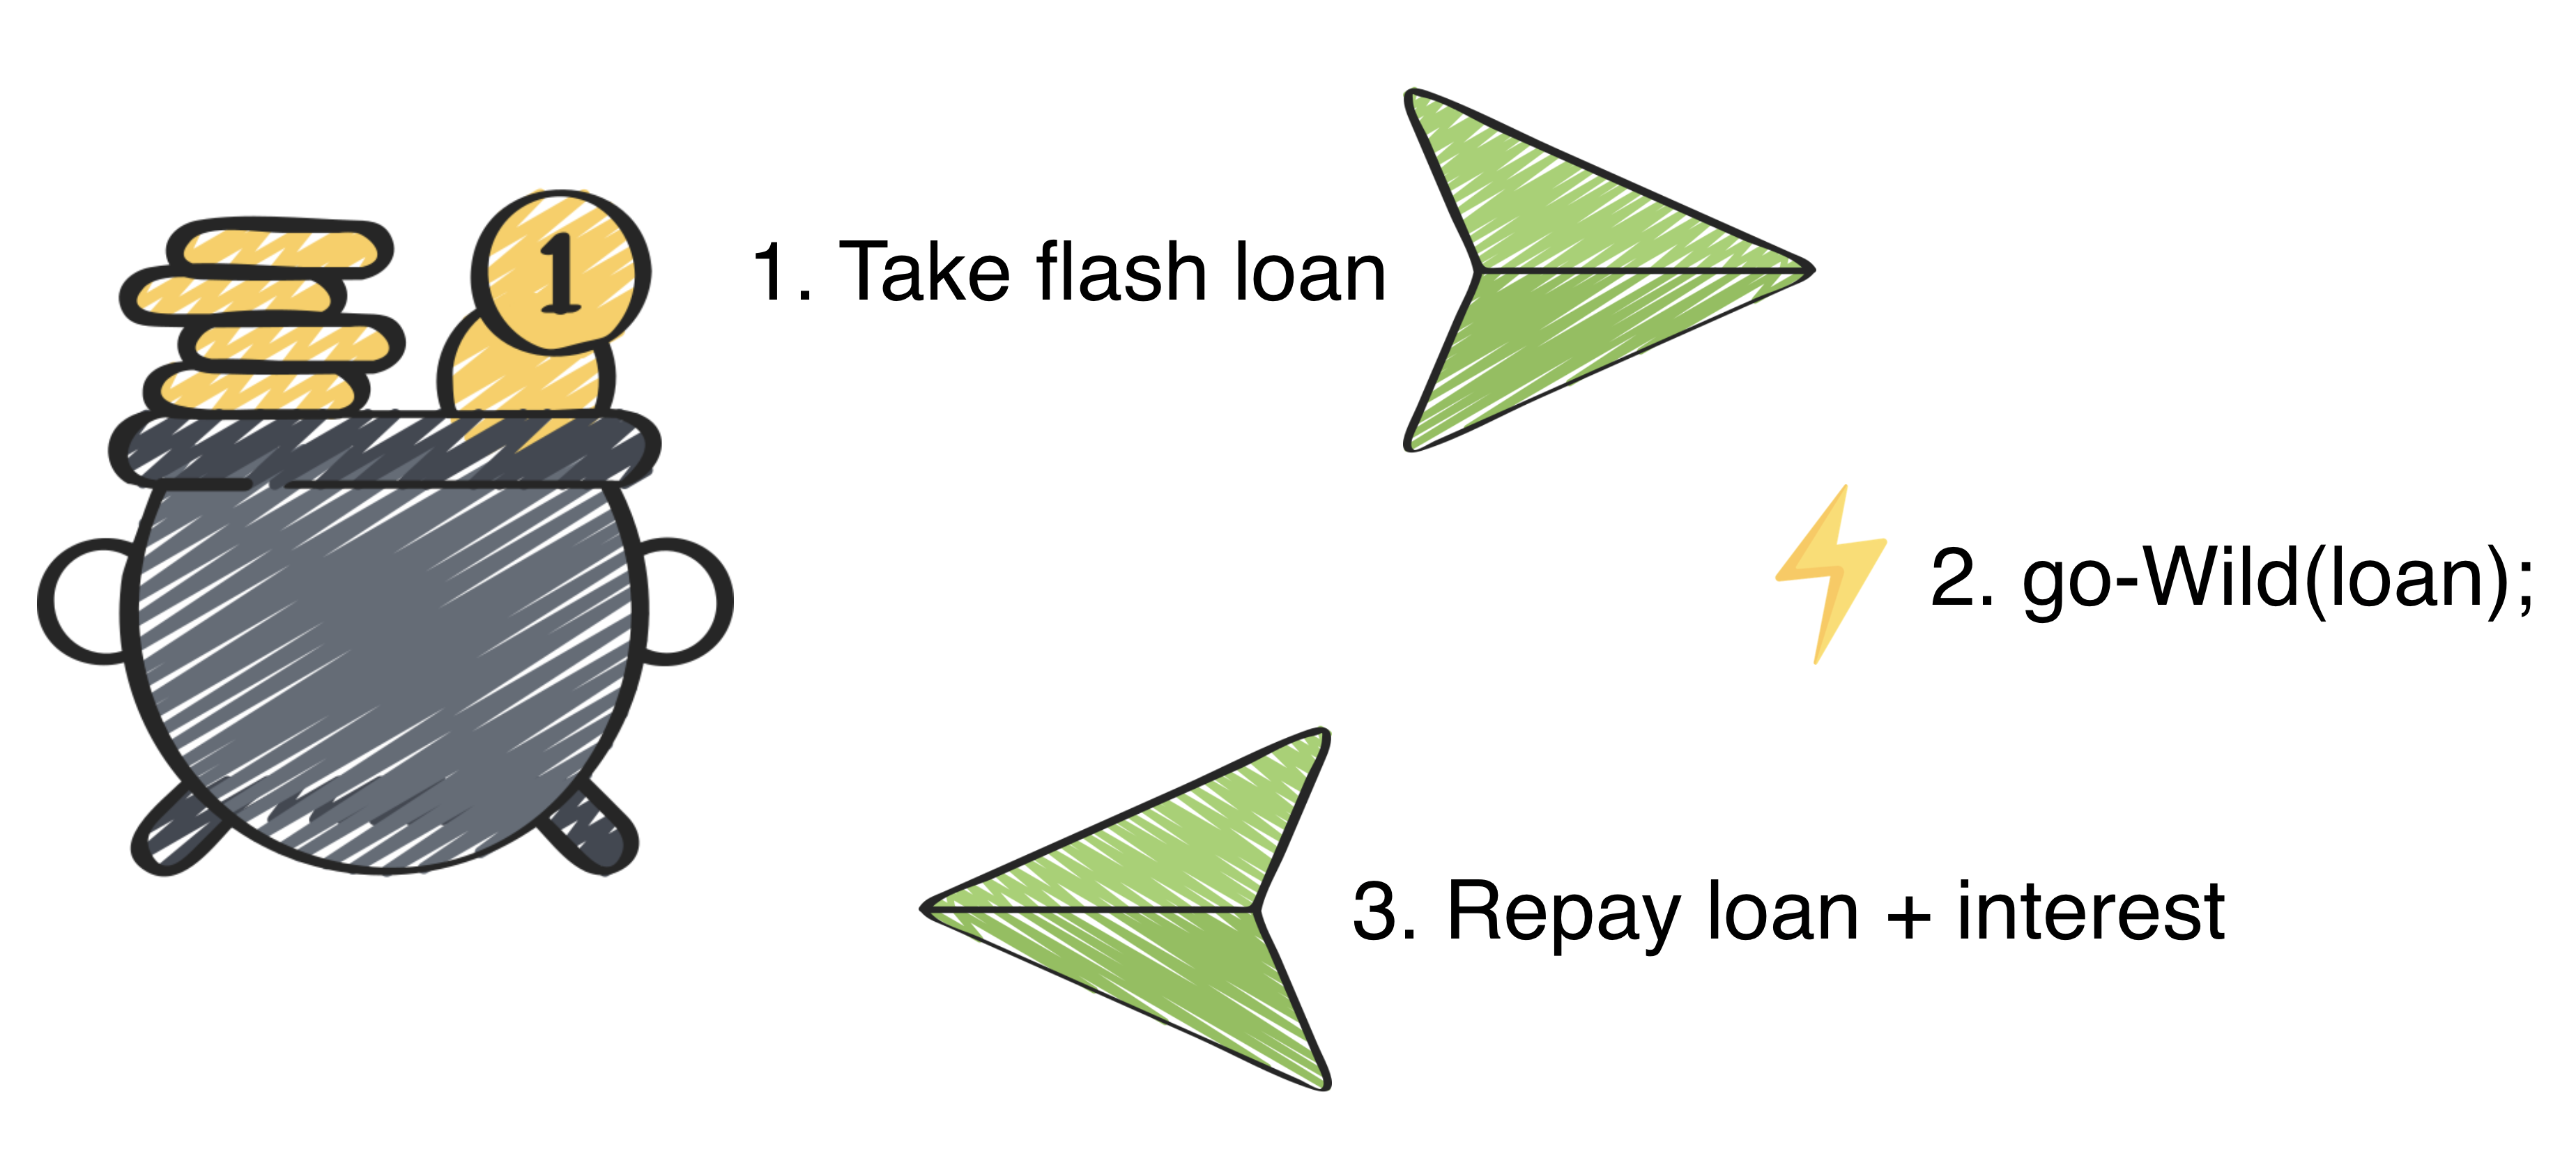 Attacking the DeFi Ecosystem with Flash Loans for Fun and Profit